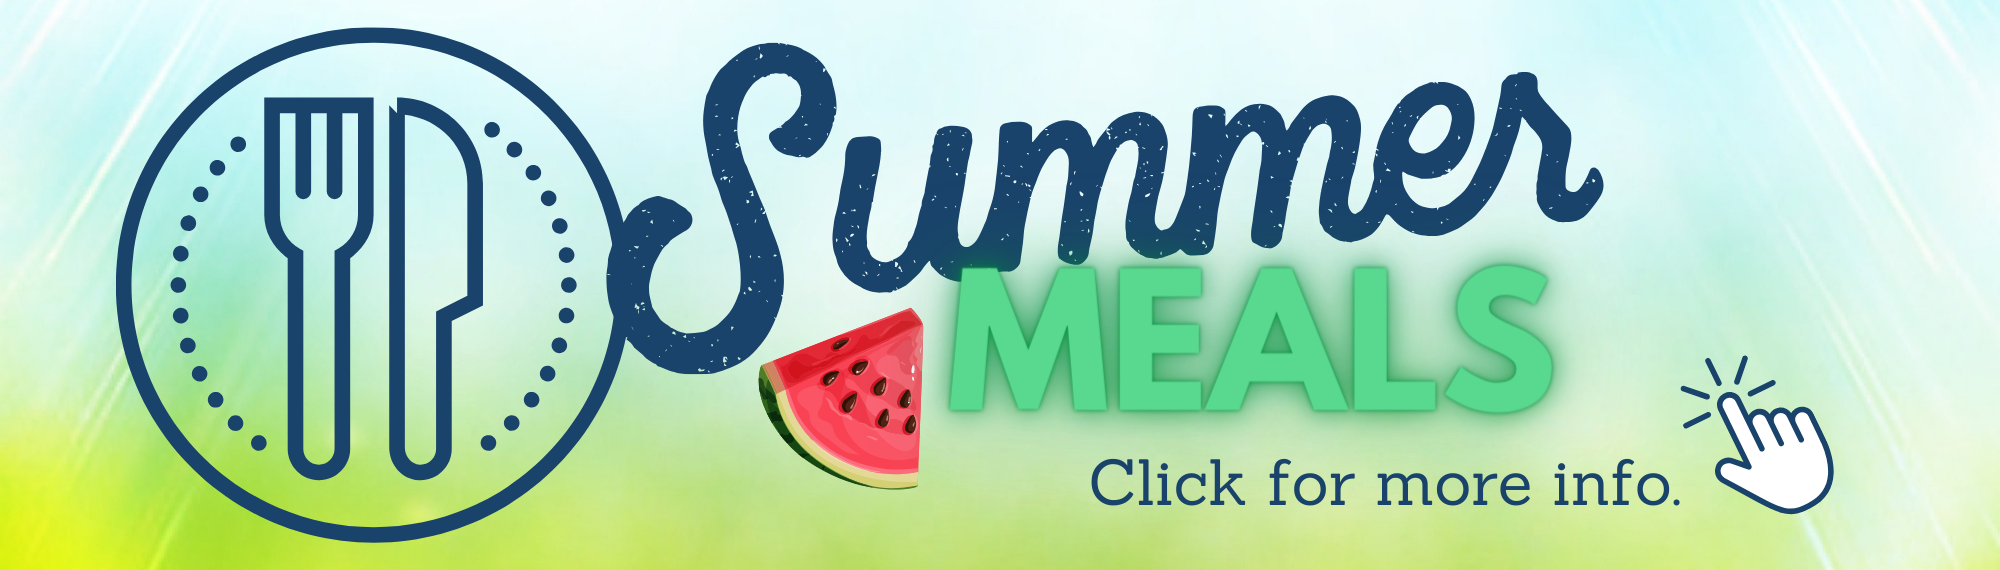 Summer Meals - Click for more info.